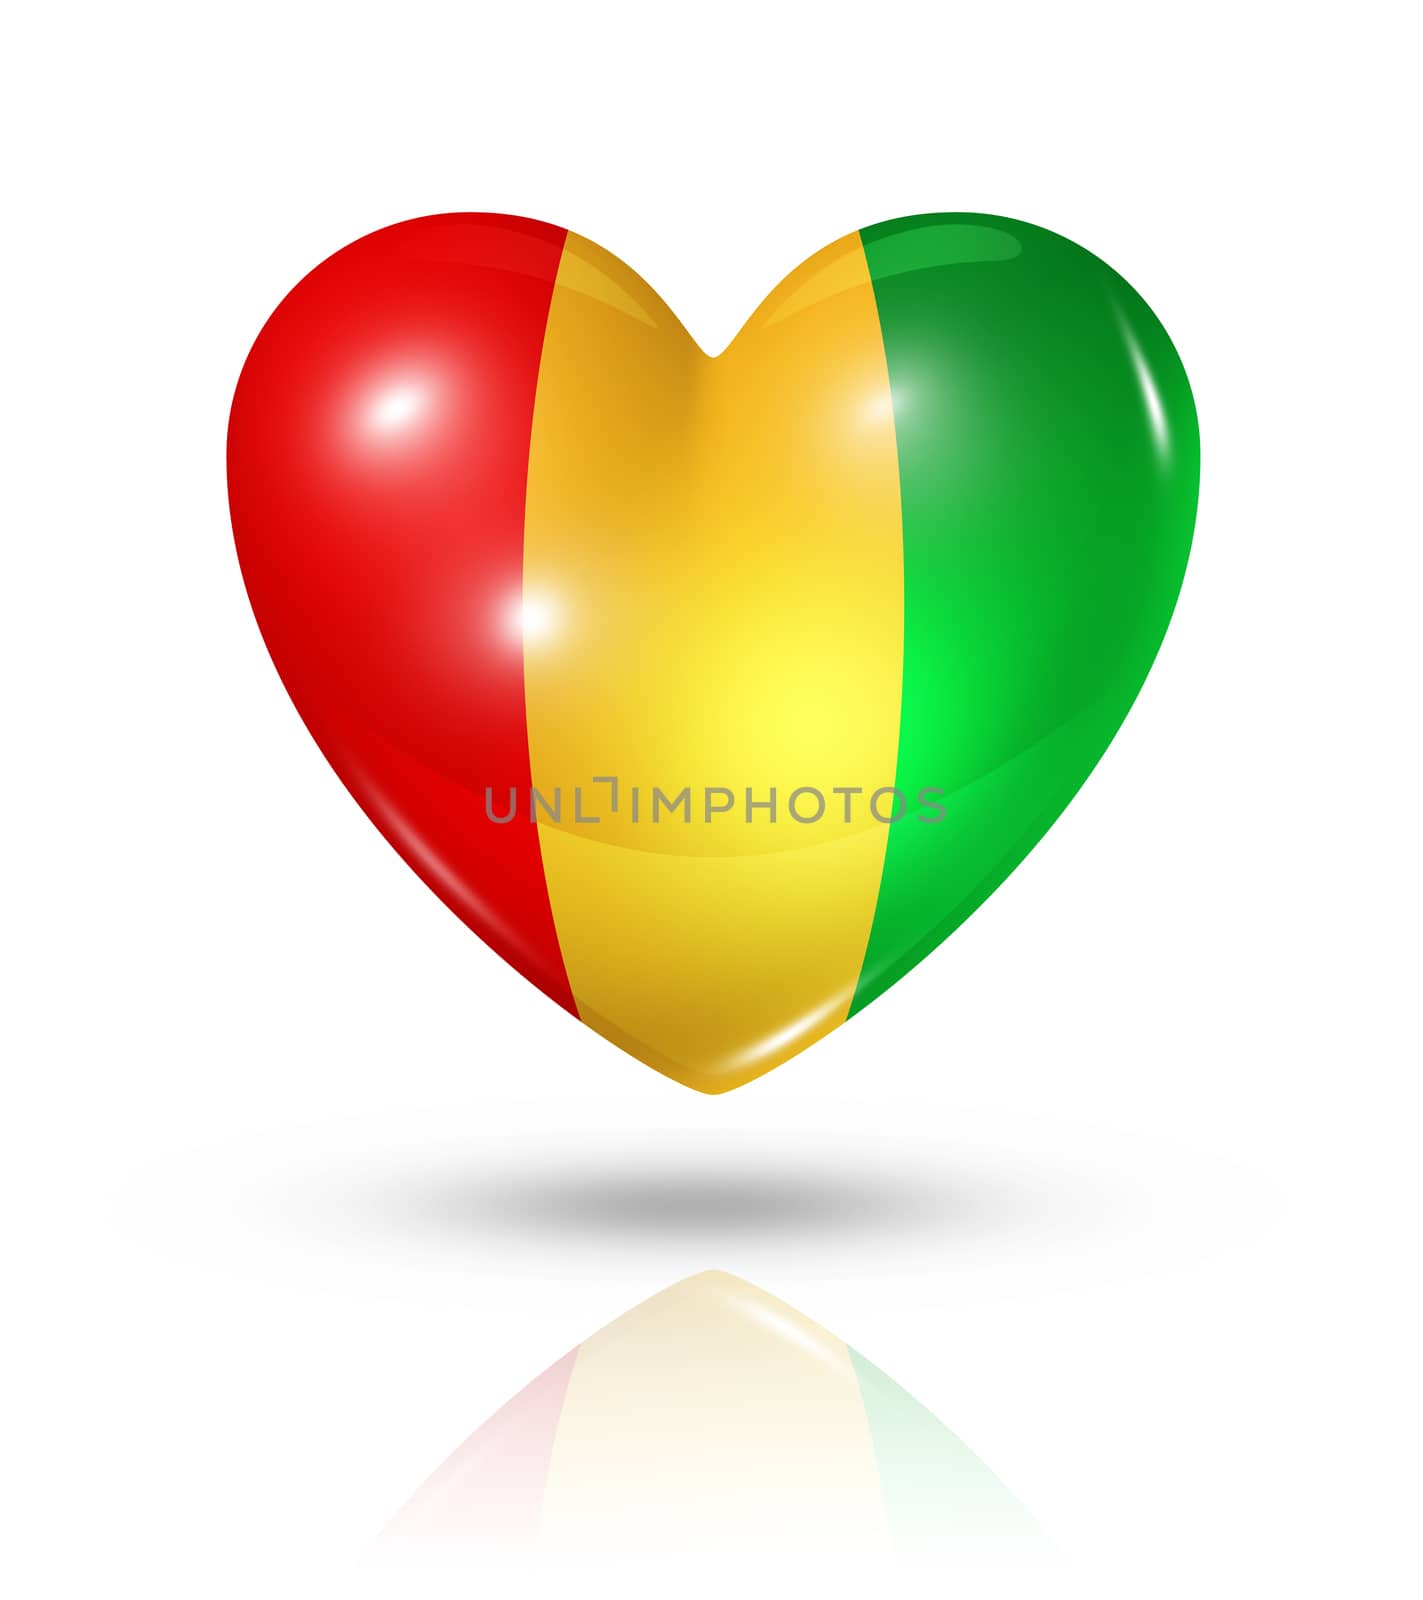 Love Guinea, heart flag icon by daboost